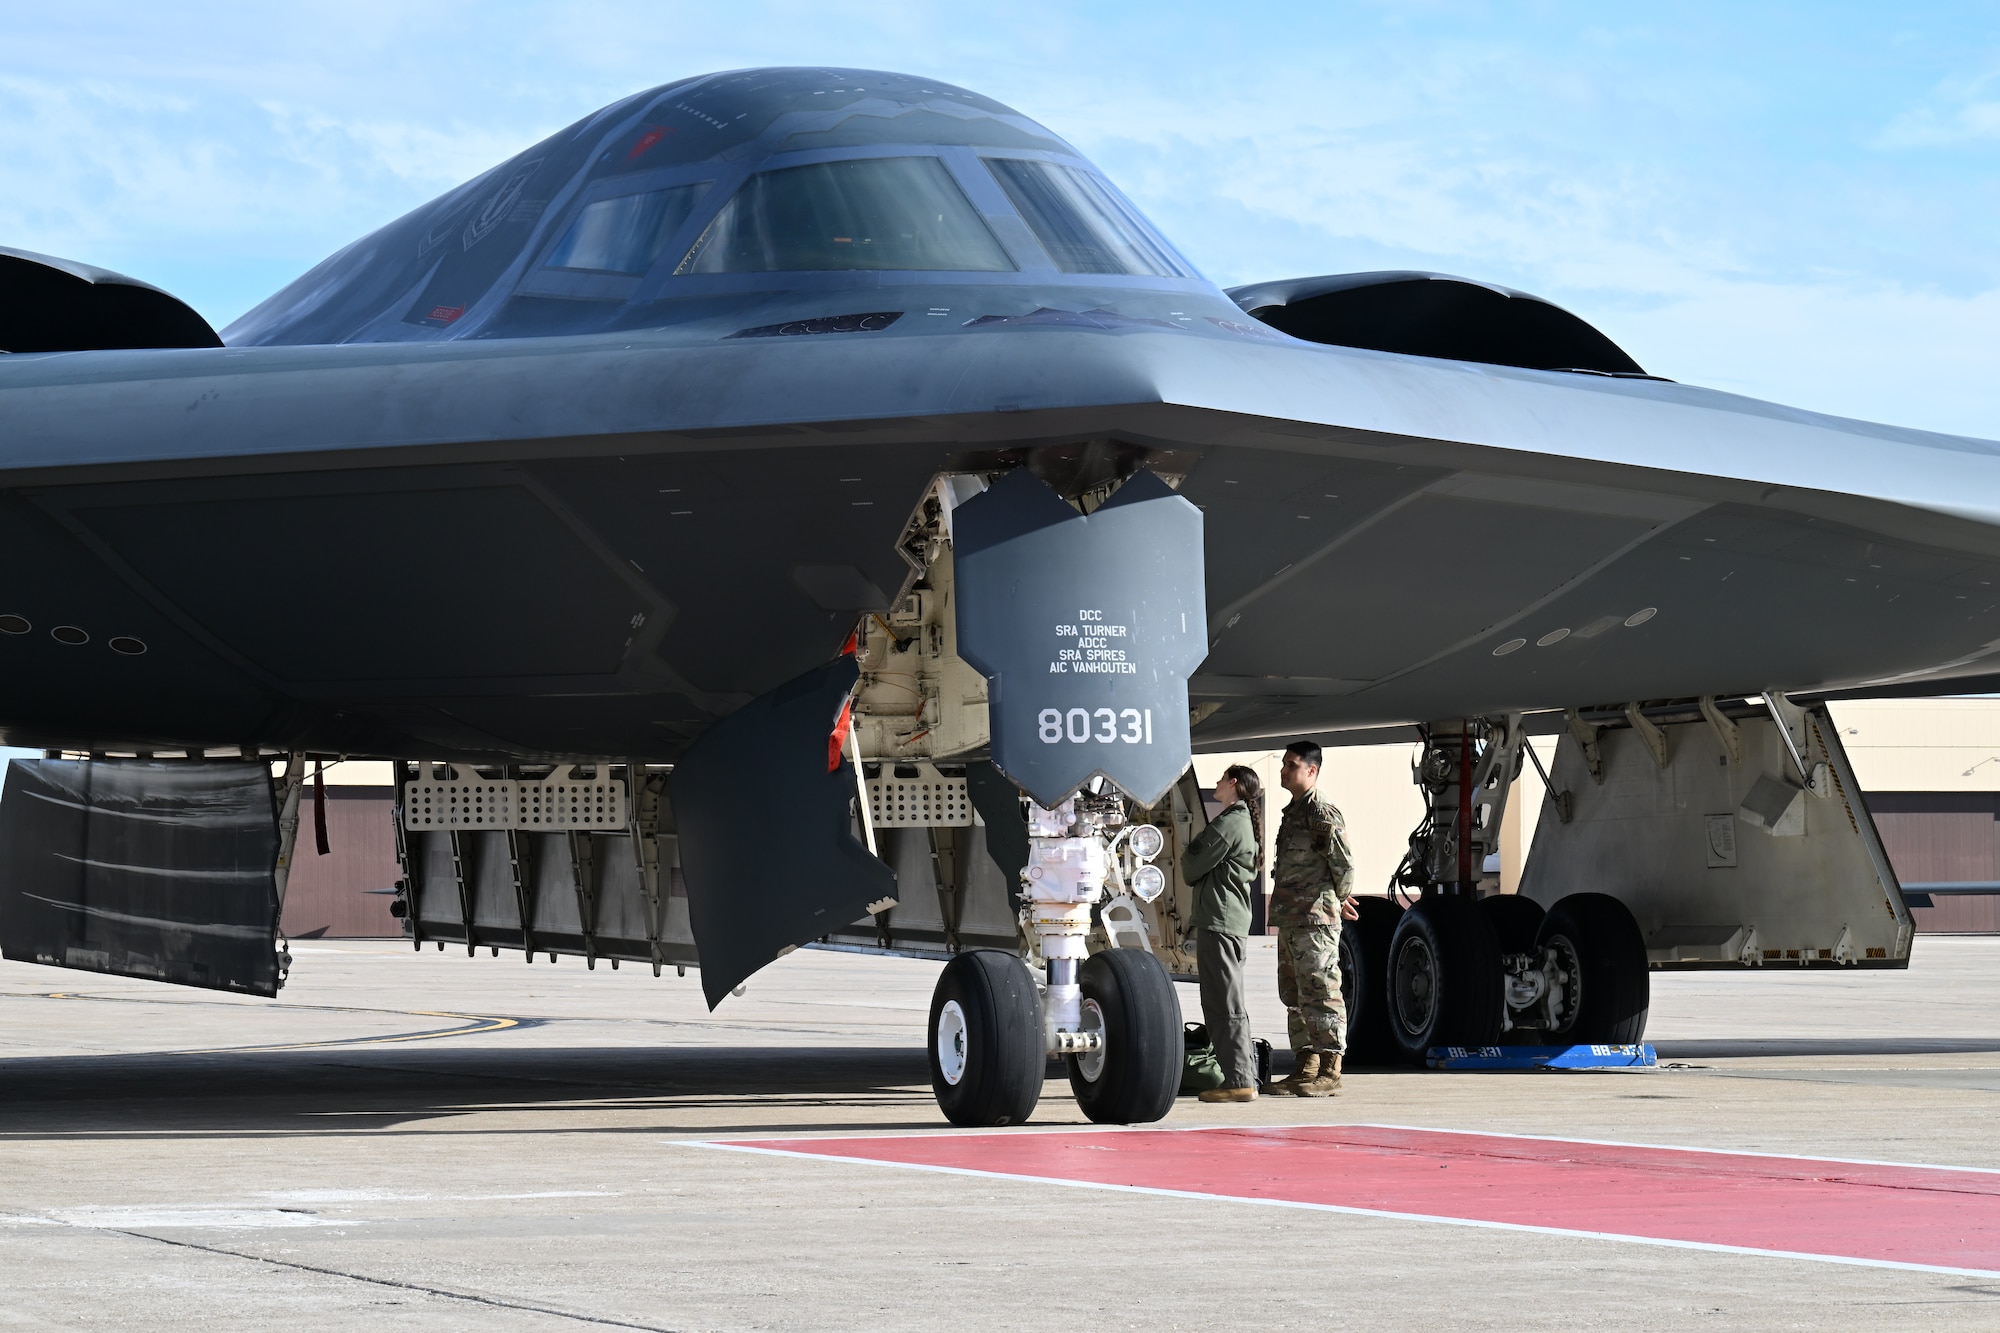 U.S. Air Force Capt. Janel Campbell, 13th Bomb Squadron B-2 pilot, Spirit 823, disembarked from a B-2 Spirit stealth bomber at Whiteman Air Force Base, Mo., Dec. 15, 2023. After completing their training, B-2 pilots take their first flight in the stealth bomber and receive their Spirit number. (U.S. Air Force photo by Airman 1st Class Matthew S. Domingos)